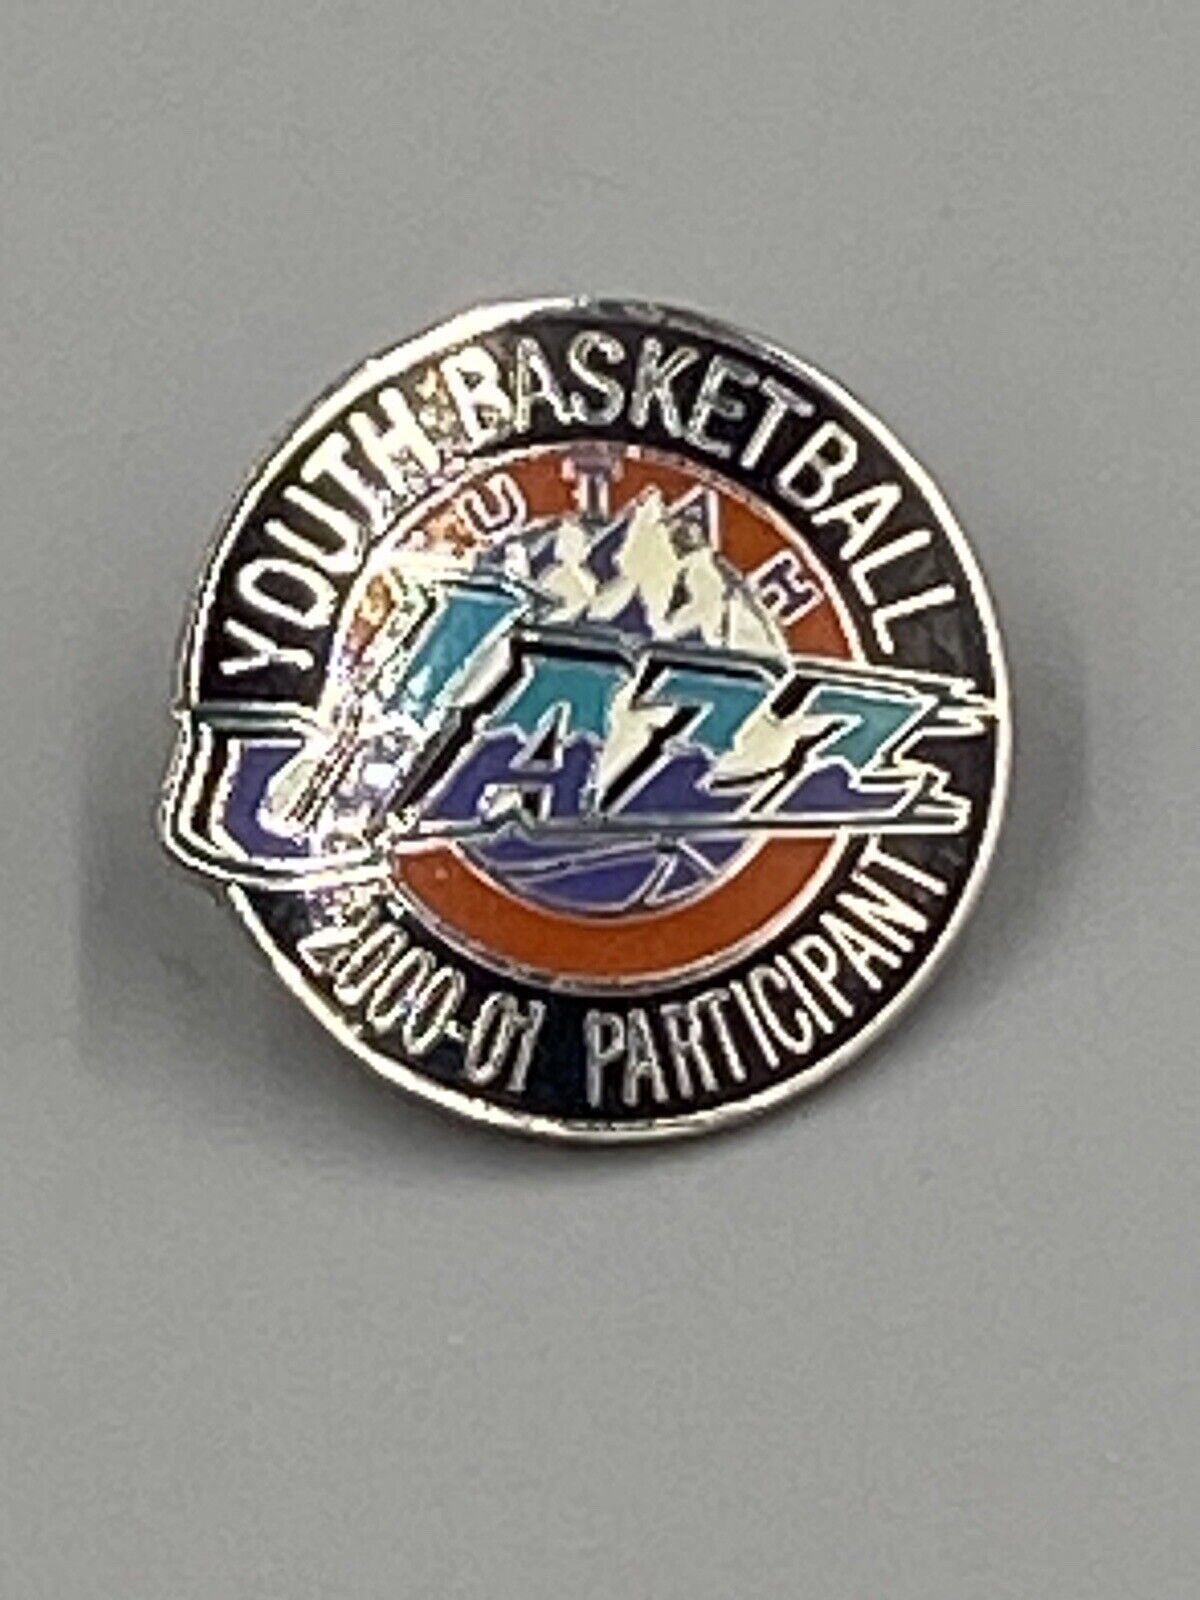 Vintage 2000-2001 Jazz Youth Basketball Participant Lapel Pin